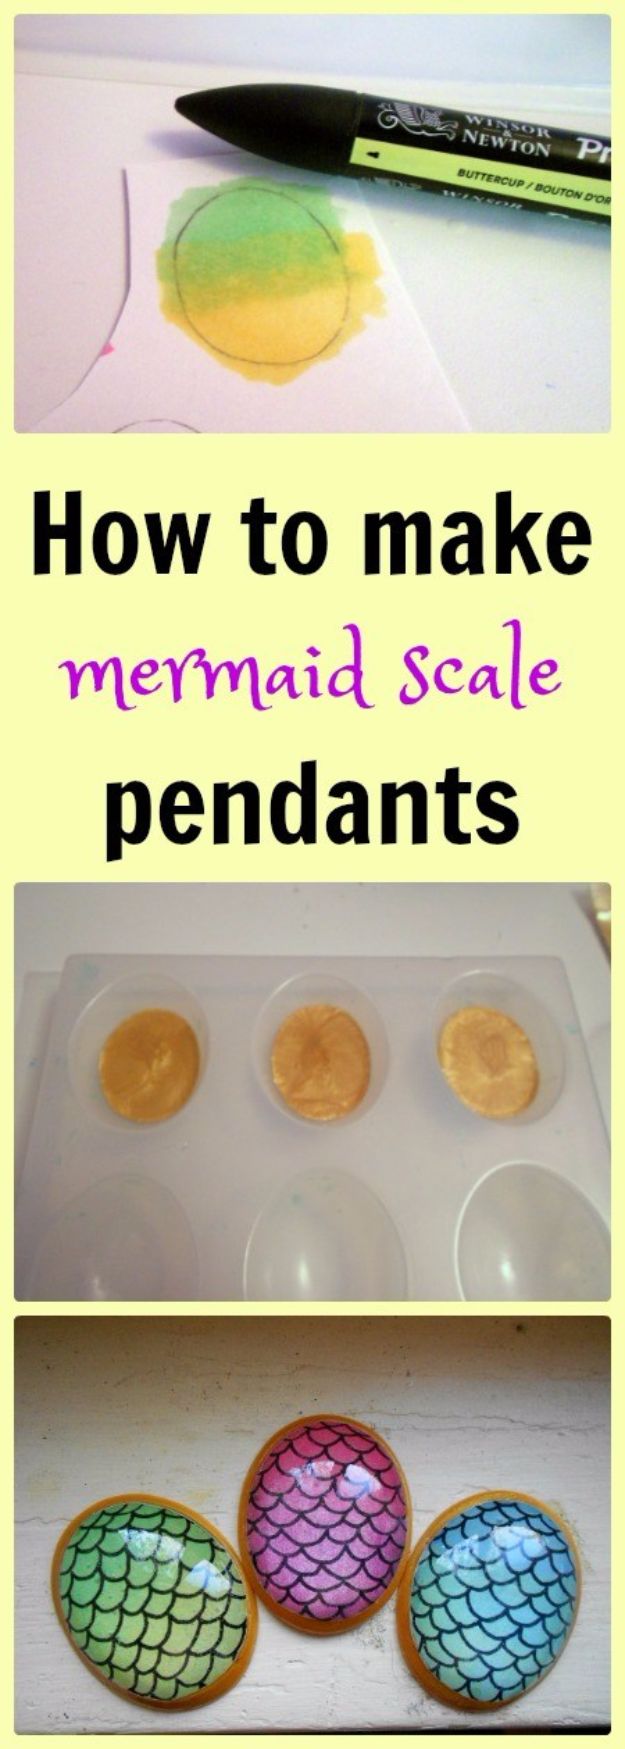 DIY Mermaid Crafts - Mermaid Scales Pendant - How To Make Room Decorations, Art Projects, Jewelry, and Makeup For Kids, Teens and Teenagers - Mermaid Costume Tutorials - Fun Clothes, Pillow Projects, Mermaid Tail Tutorial 